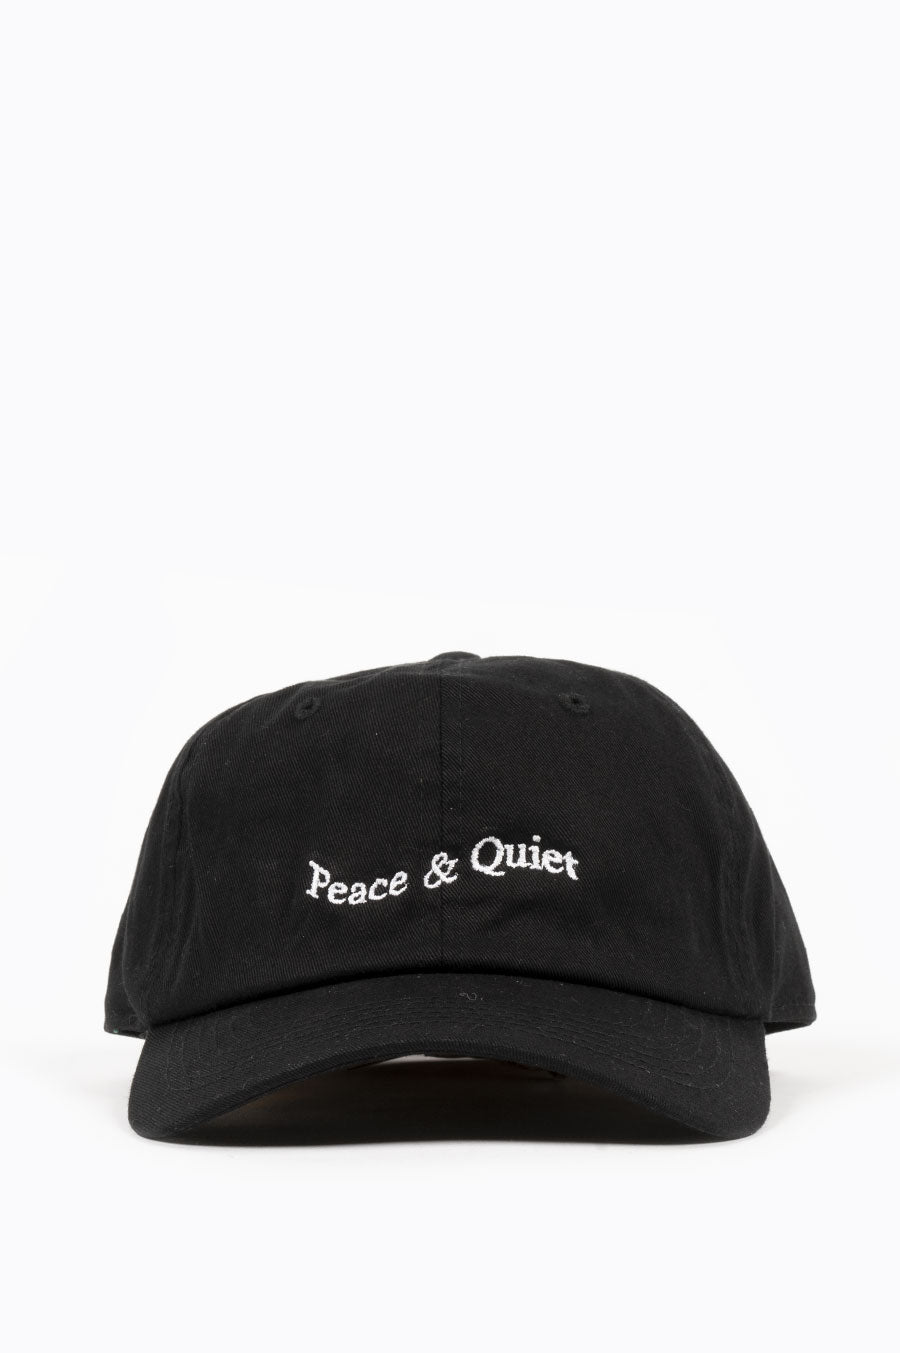 THE MUSEUM OF PEACE AND QUIET MICRO WORDMARK HAT BLACK – BLENDS